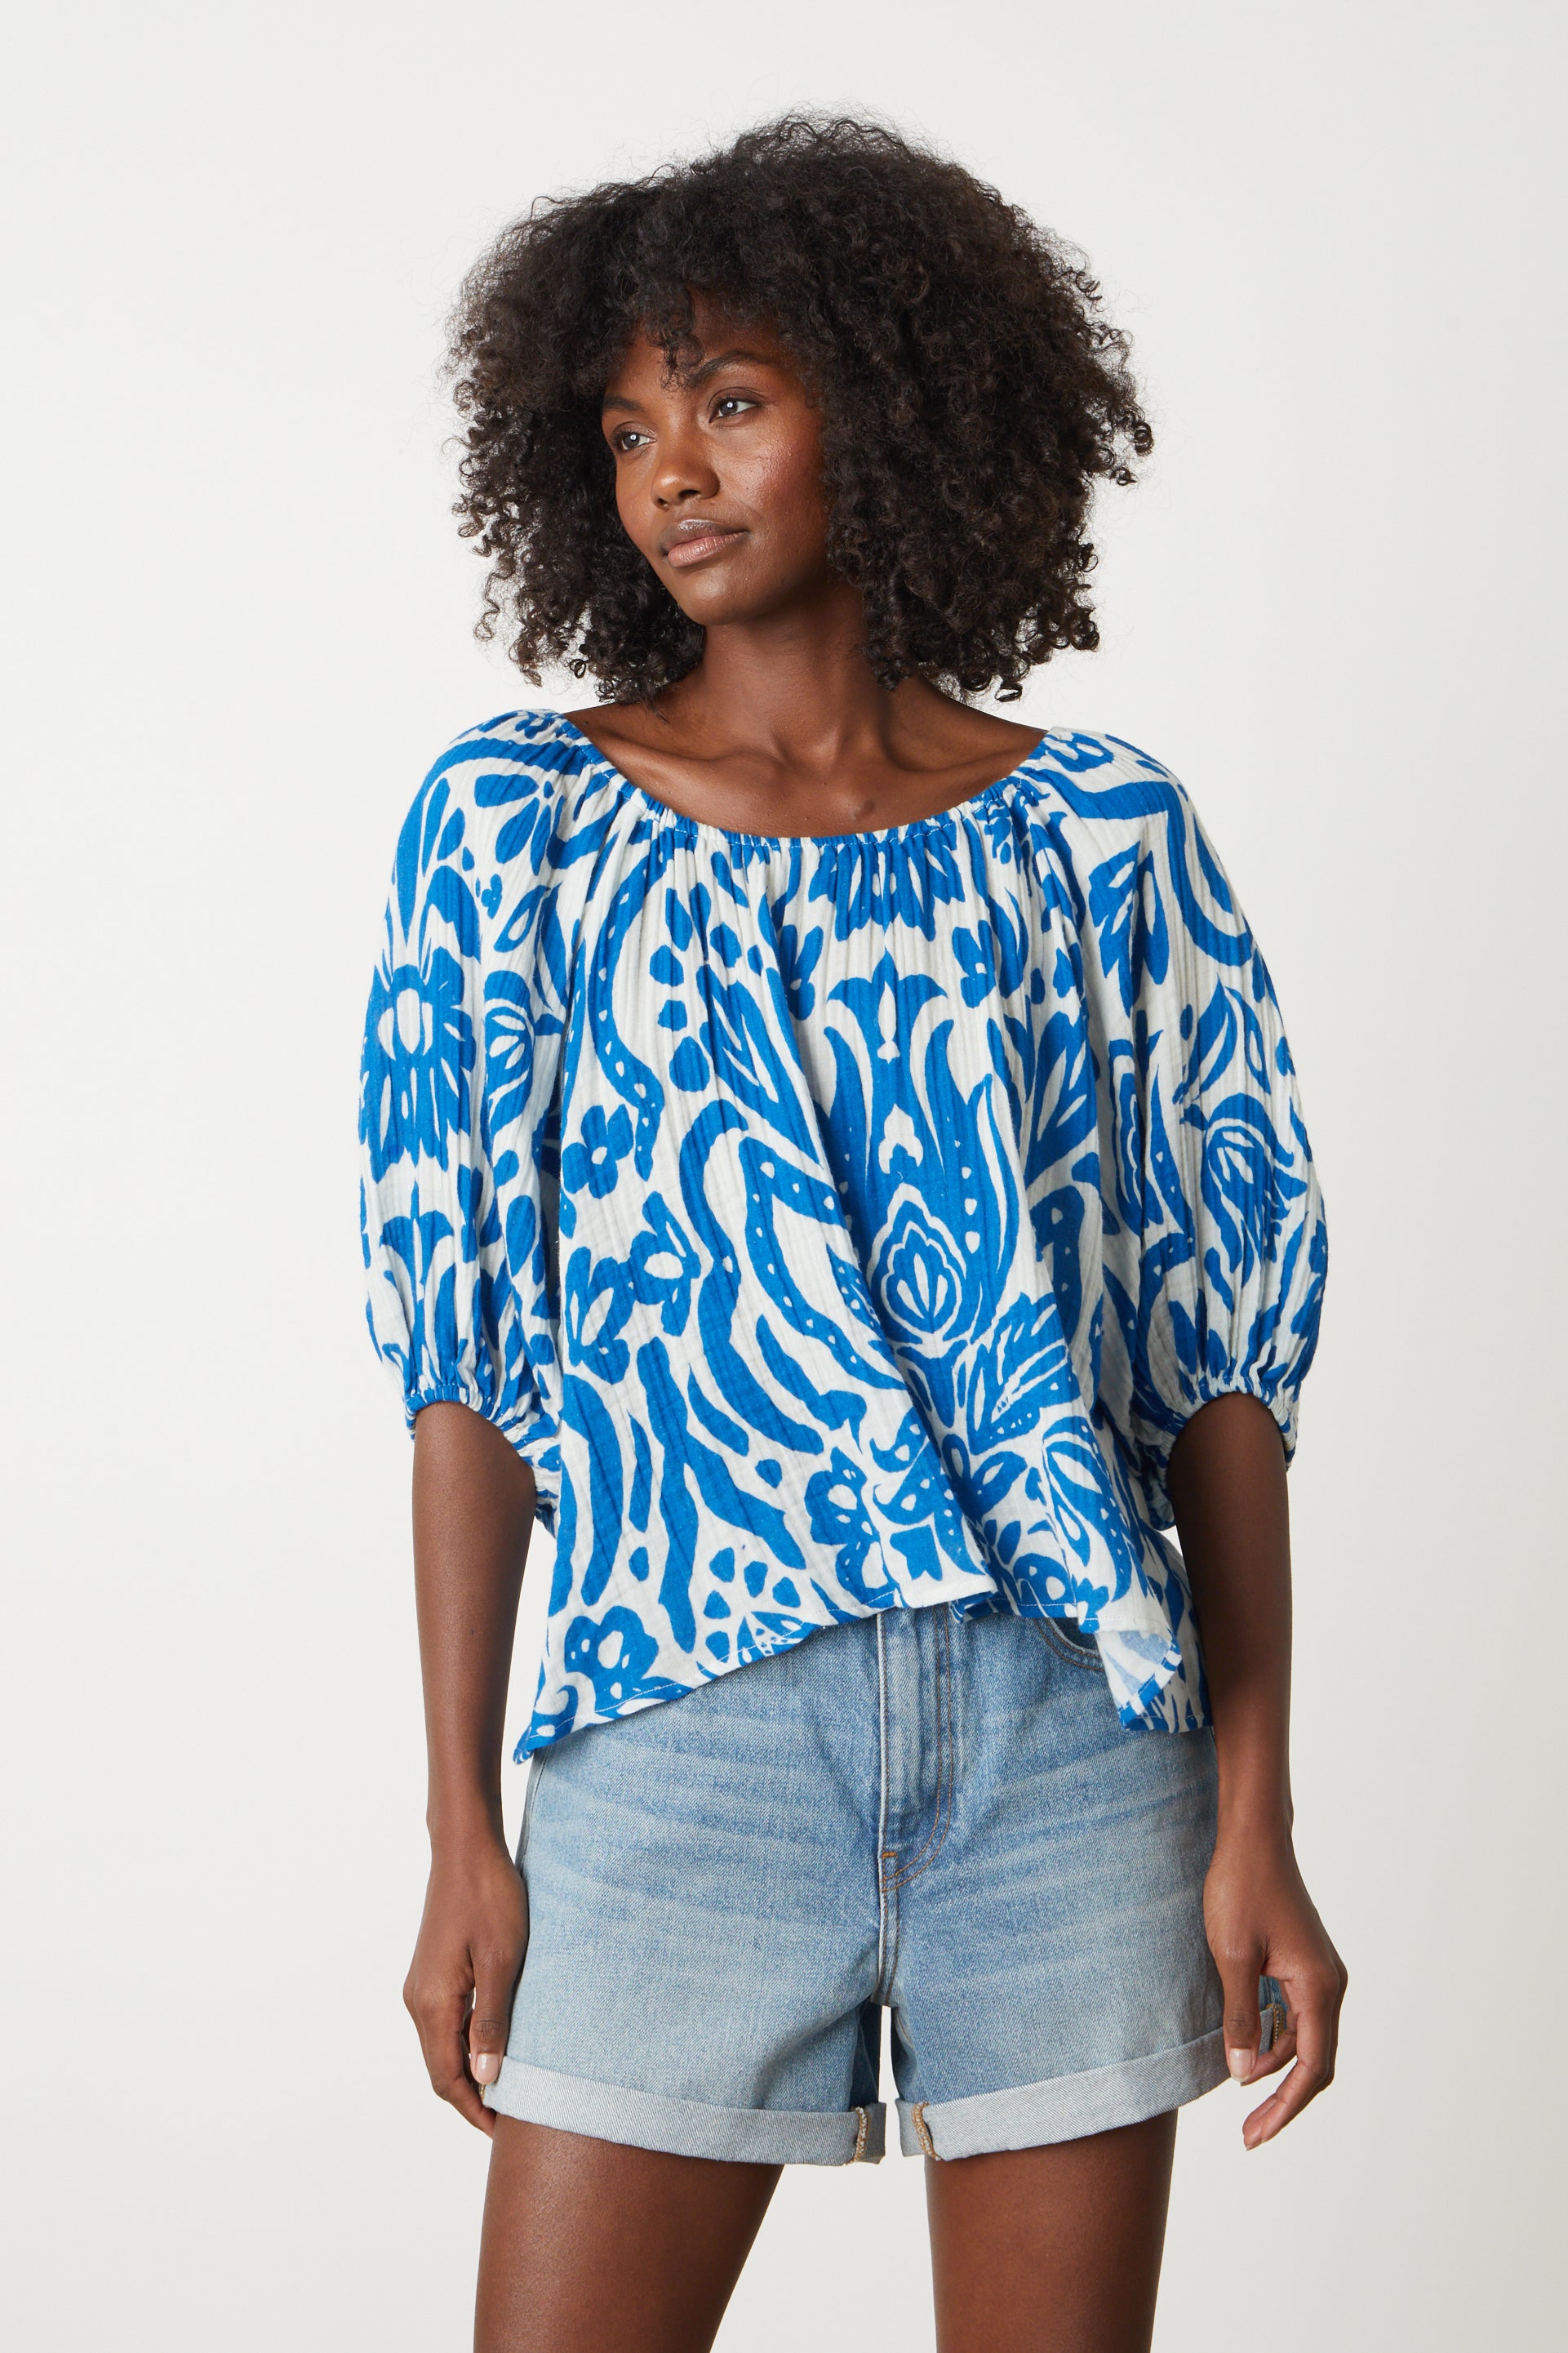   The model is wearing a Velvet by Graham & Spencer Candice Printed Cotton Gauze Top in bold blue and white print with denim shorts 